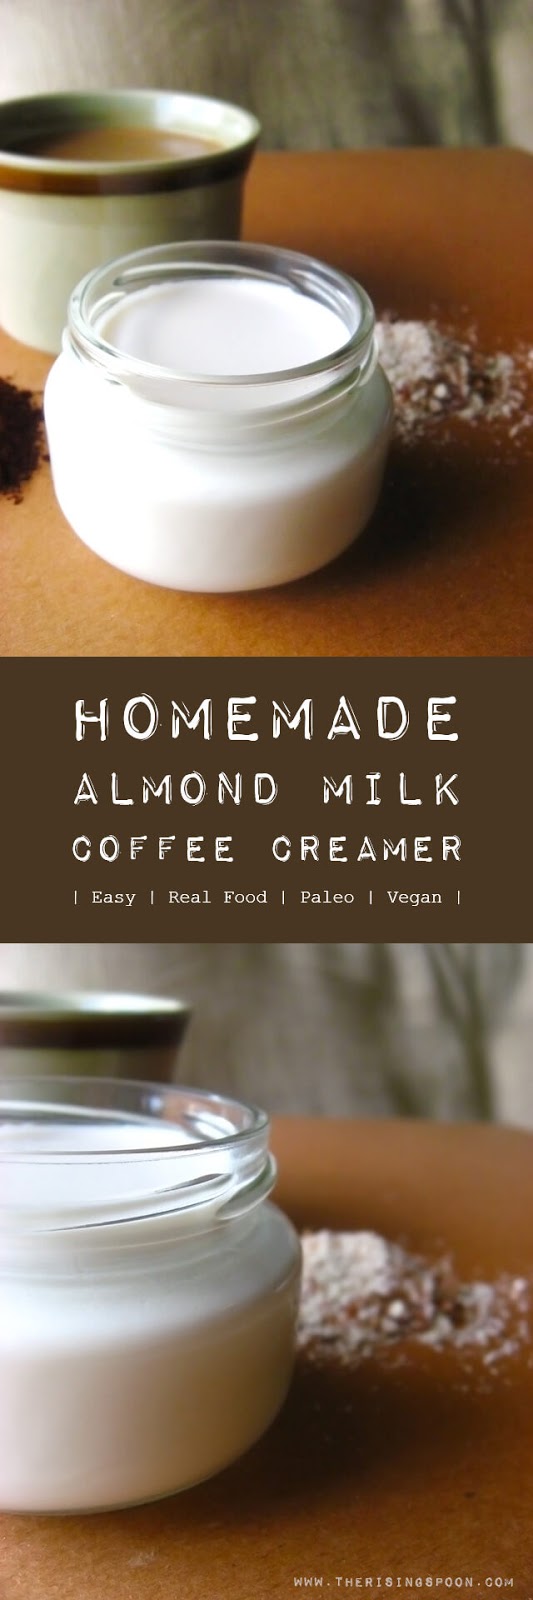 An easy recipe for an almond milk coffee creamer with a concentrated flavor and creamy texture, perfect for splashing into your favorite coffee or tea. Skip the store-bought non-dairy creamers with weird emulsifiers and preservatives and make it at home instead!